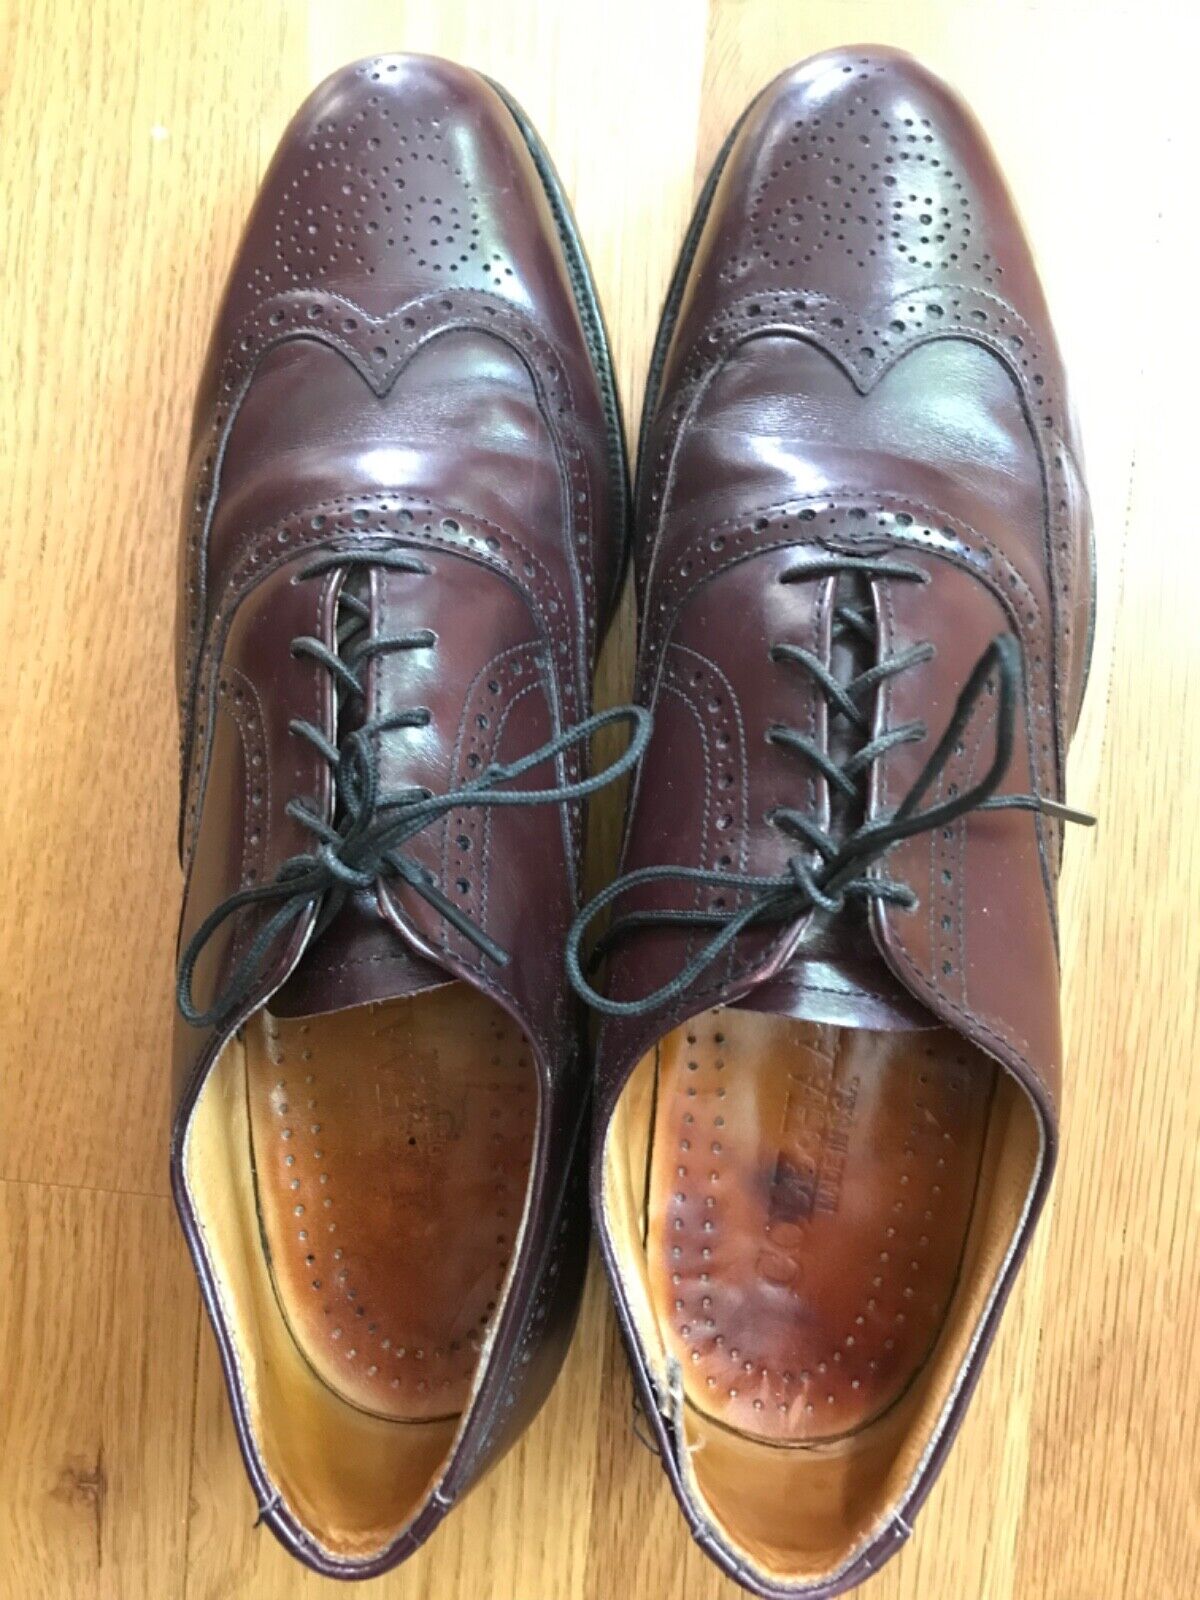 (2 pairs) classic men’s formal leather Brogue shoes brown/burgundy size 9 1/2  Bostonian, Cole & Haan - фотография #6